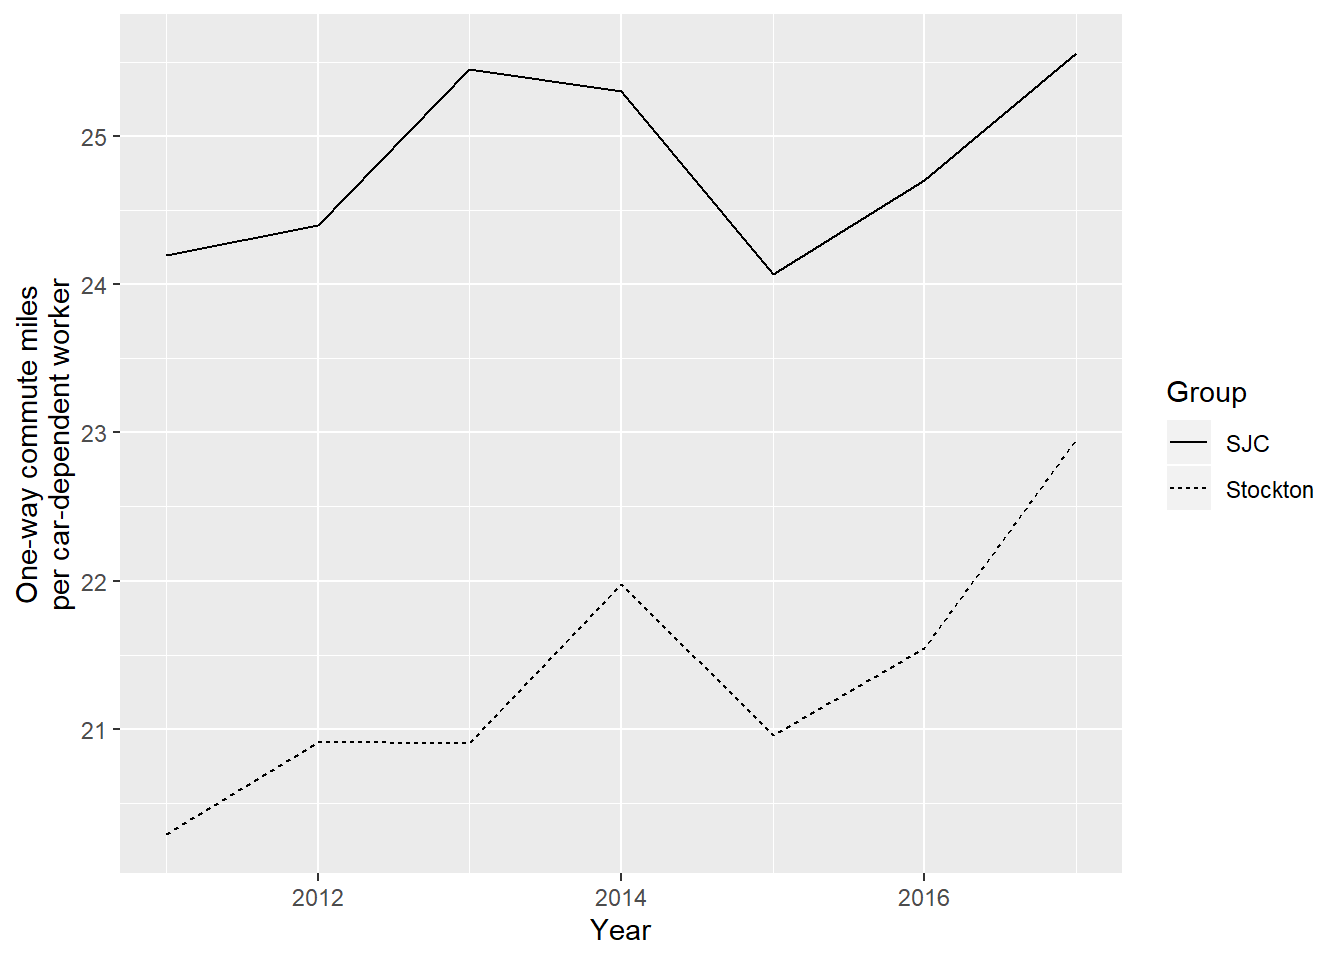 One-way commute miles per car-dependent worker in Stockton vs. SJC, 2011 to 2017. Data from LODES.